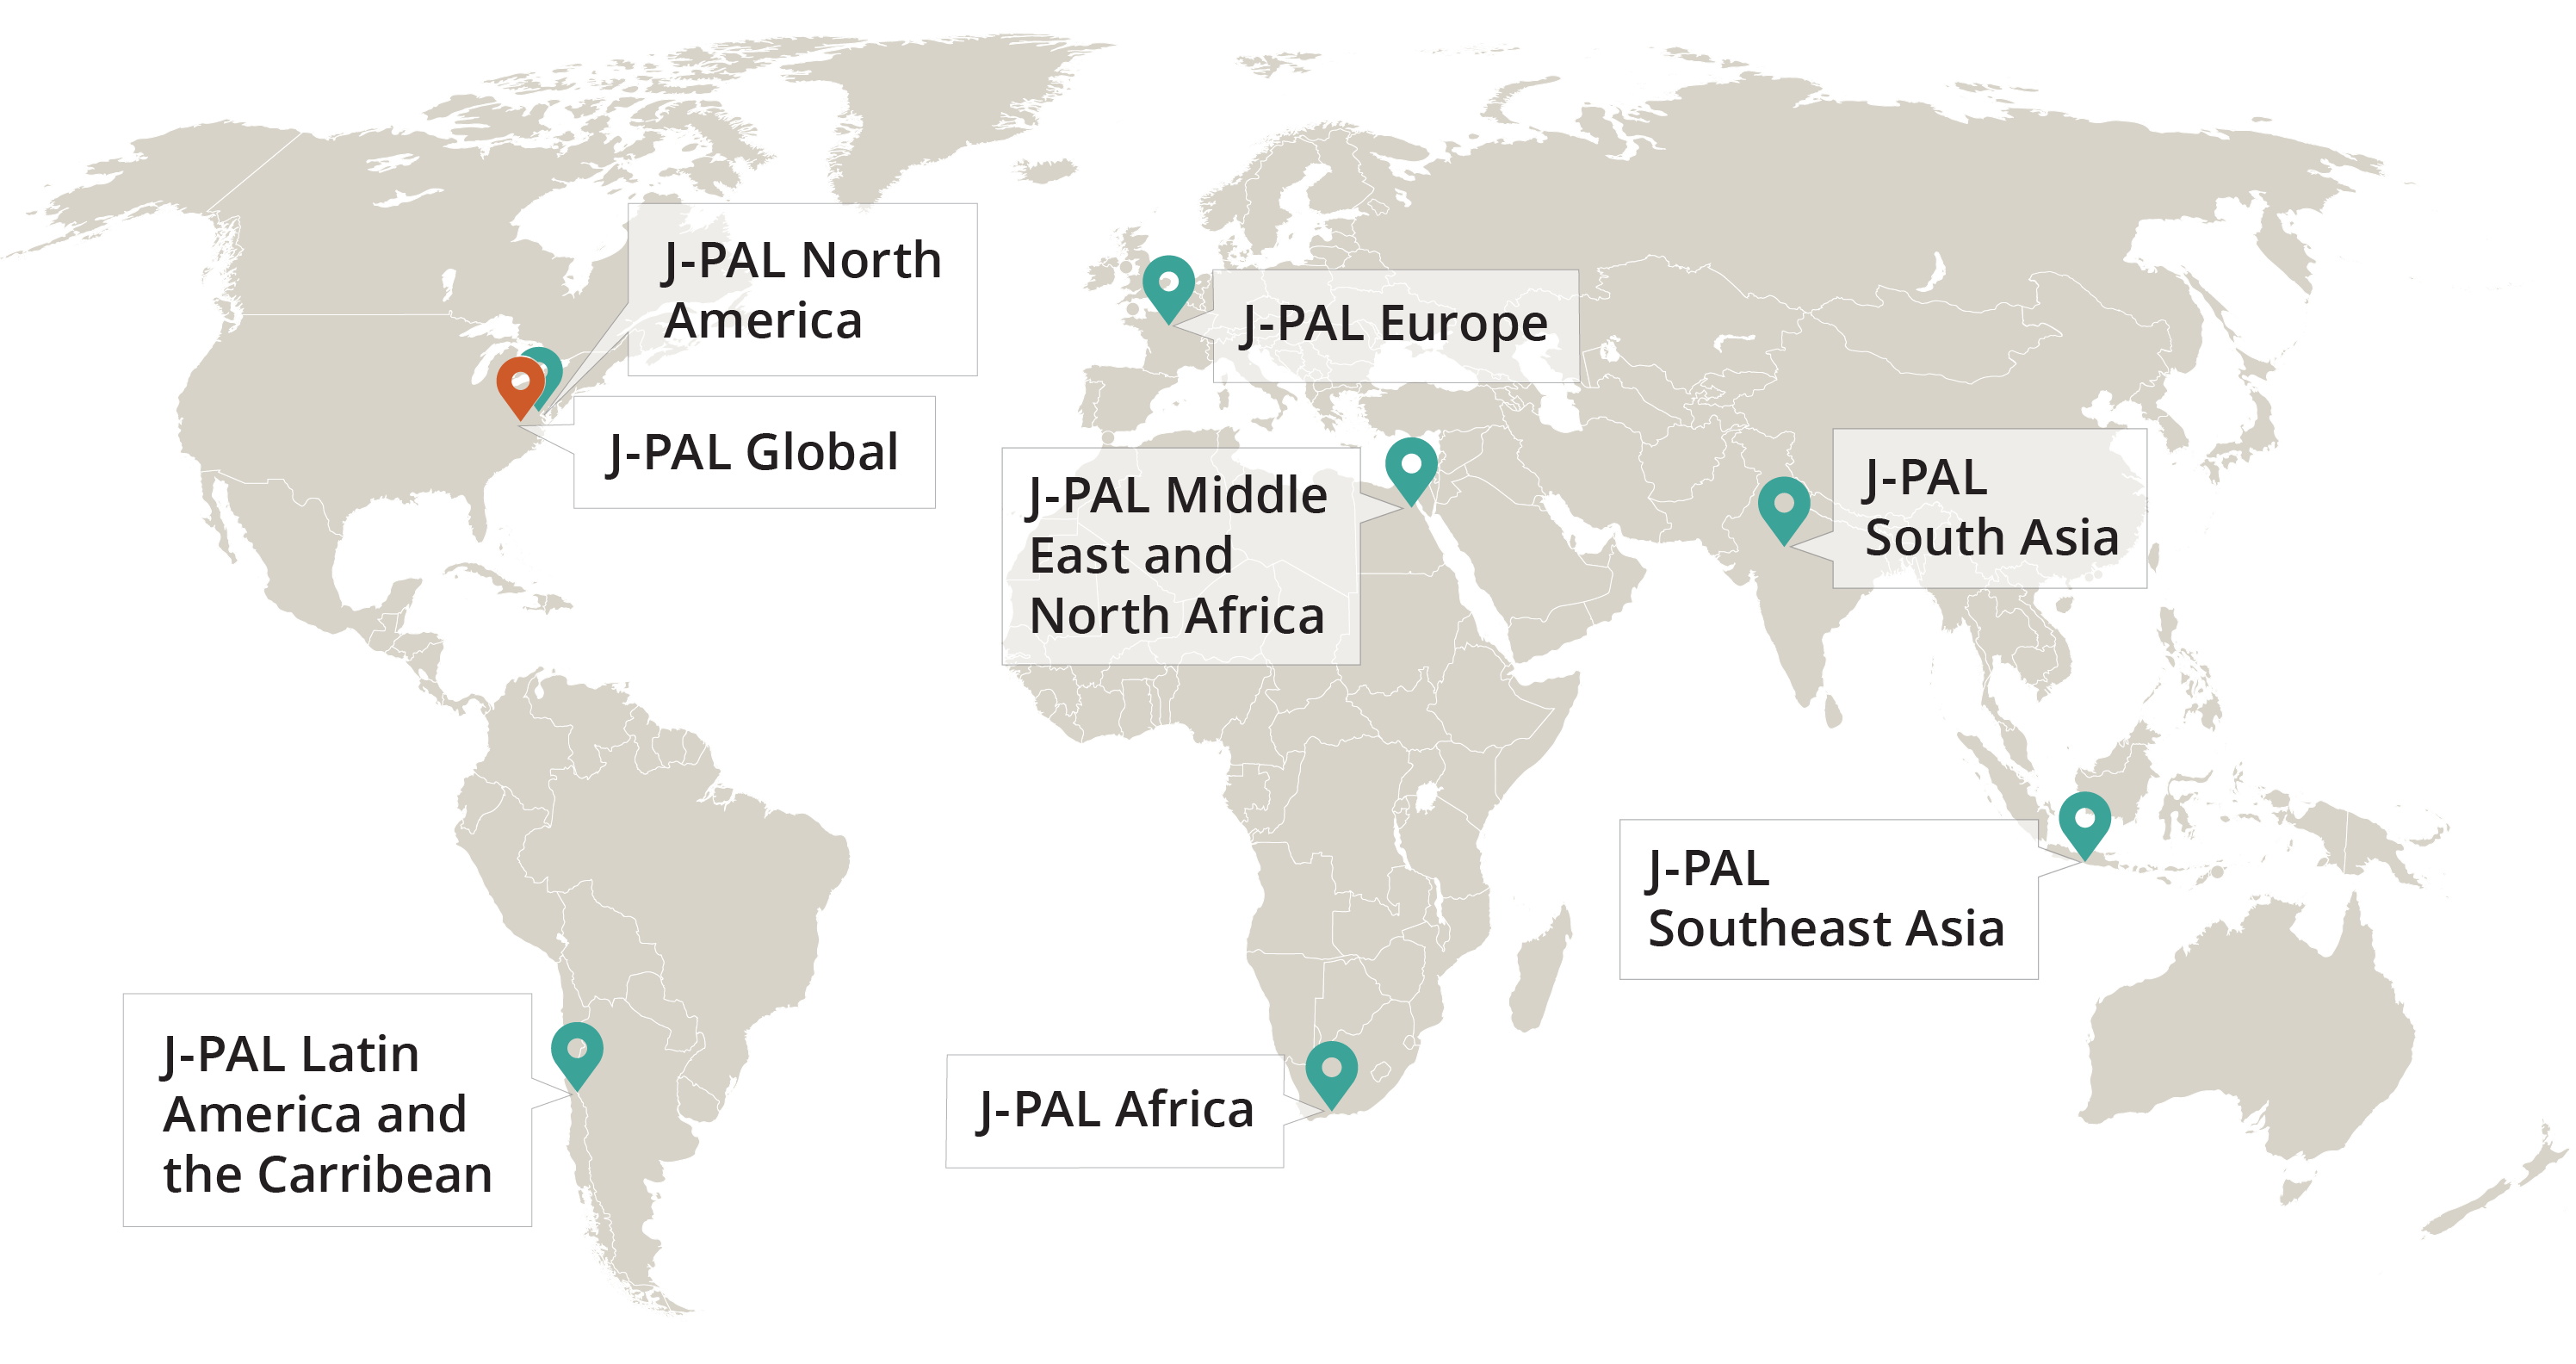 World map highlighting the countries where J-PAL has offices